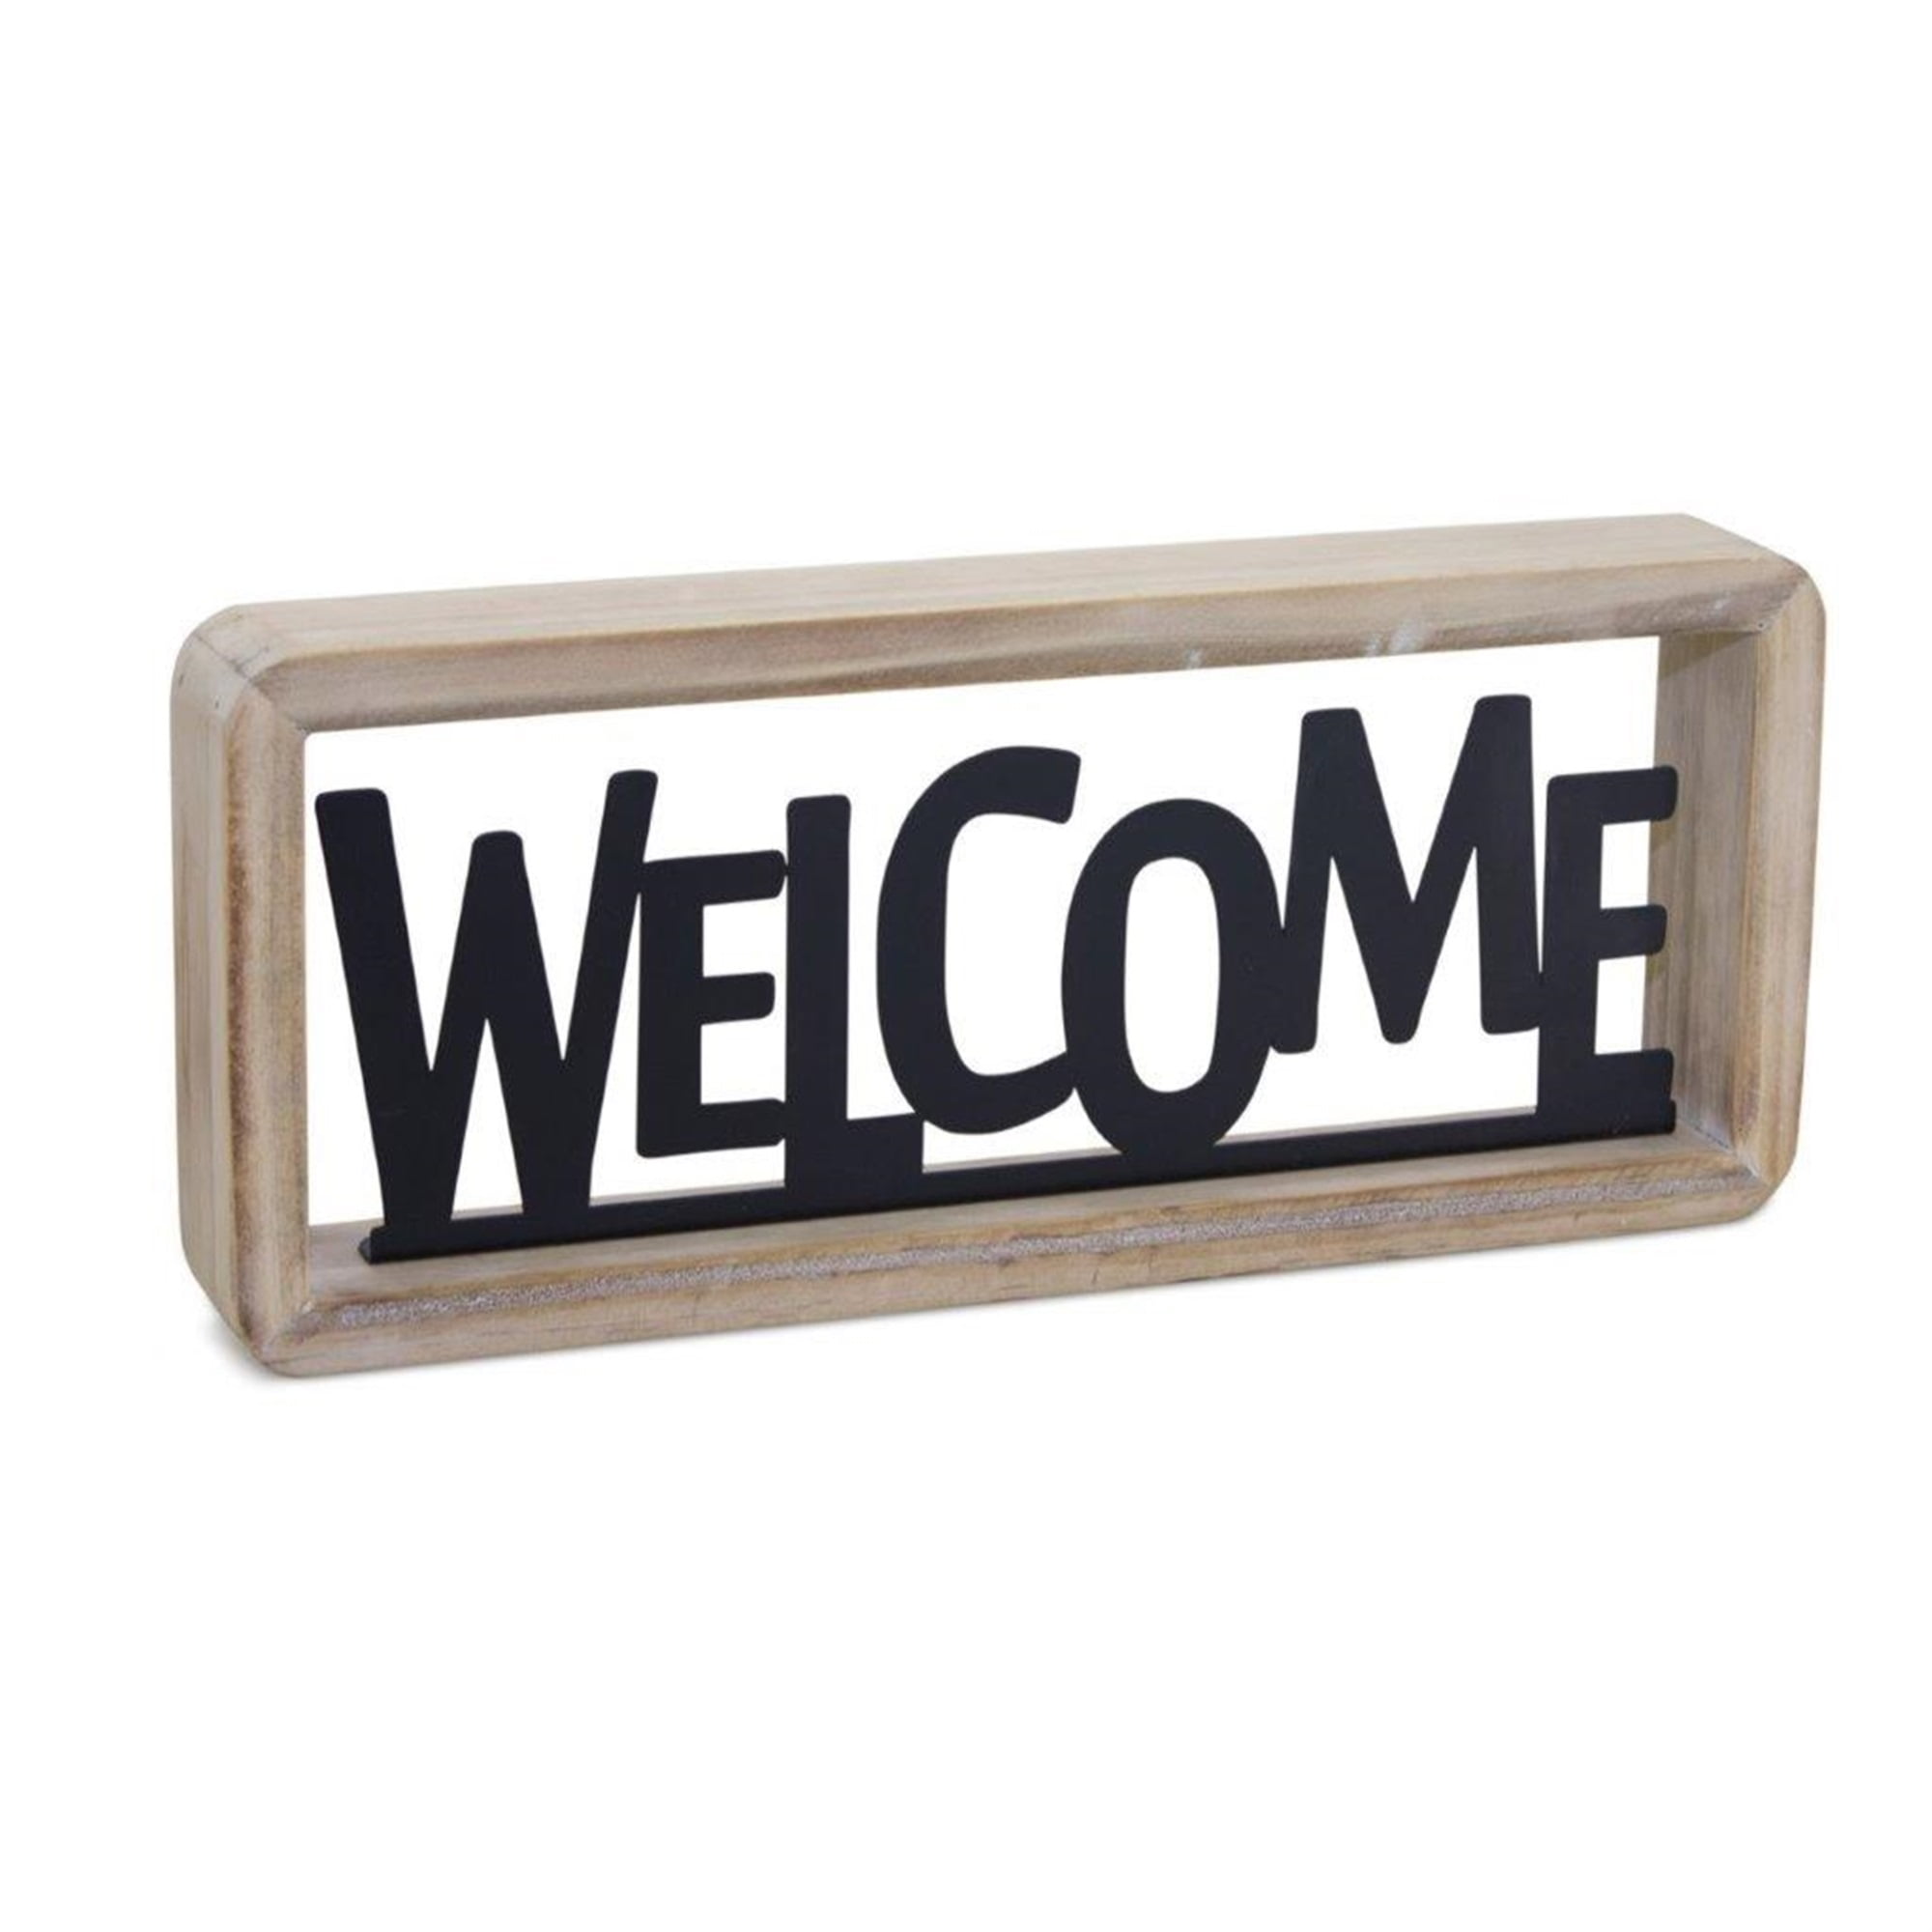 Welcome Sign 11.75"L x 5"H Wood/Metal